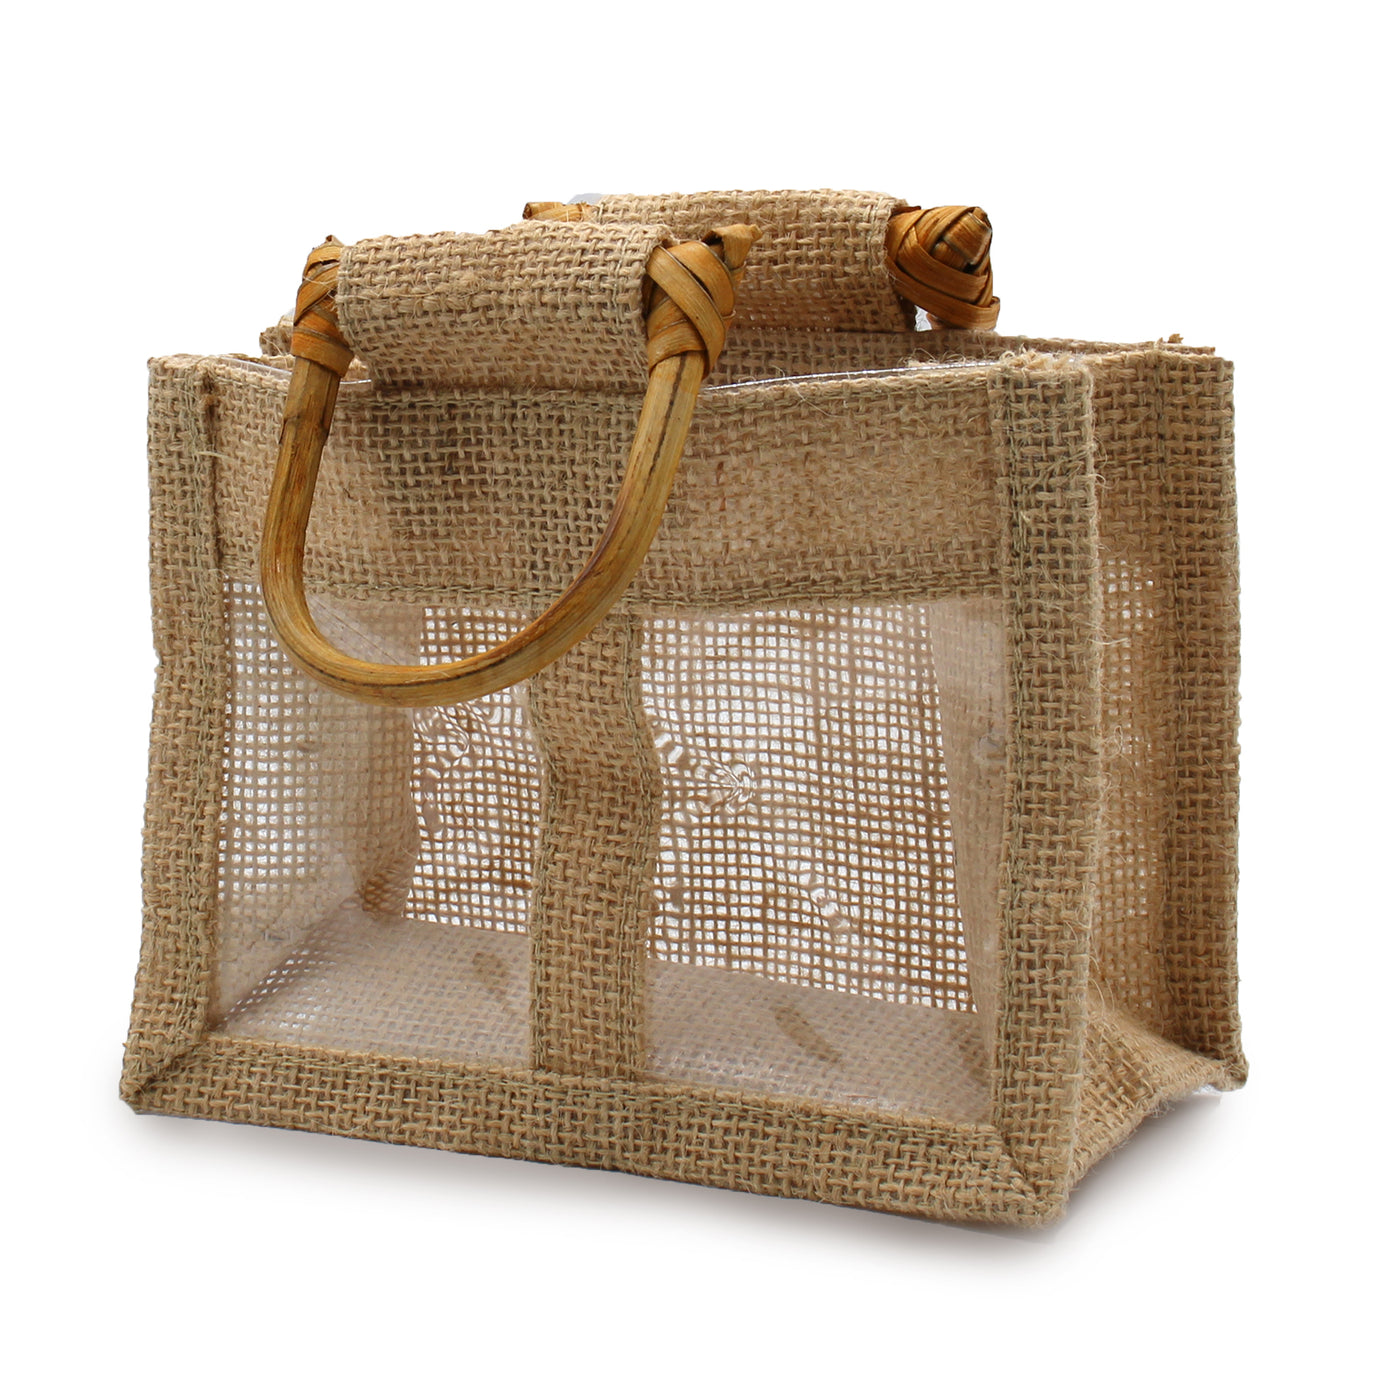 Natural Jute Double Candle Gift Bag With Clear Window And Handle.